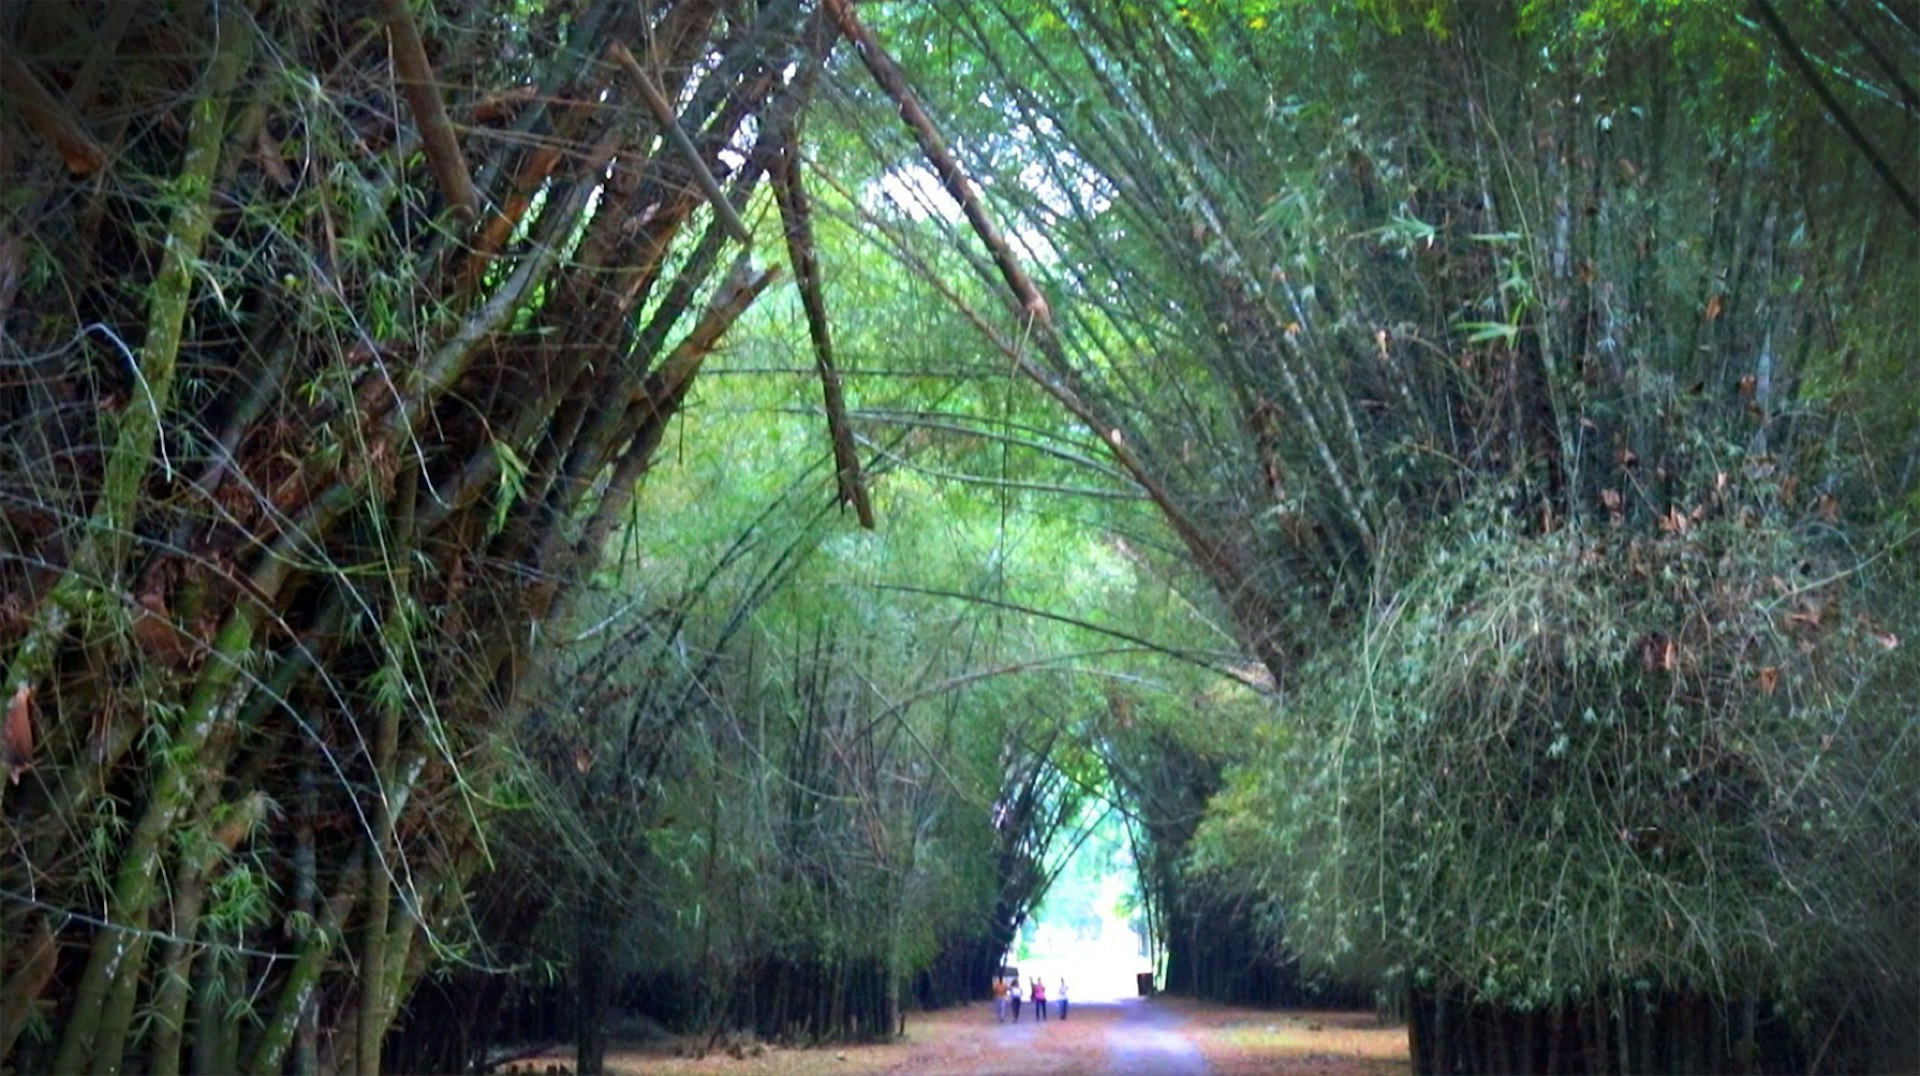 A series of bamboo trees highlight a pathway at the Lancetilla Jardín Botánico in Honduras © Erik R. Trinidad / Lonely Planet 